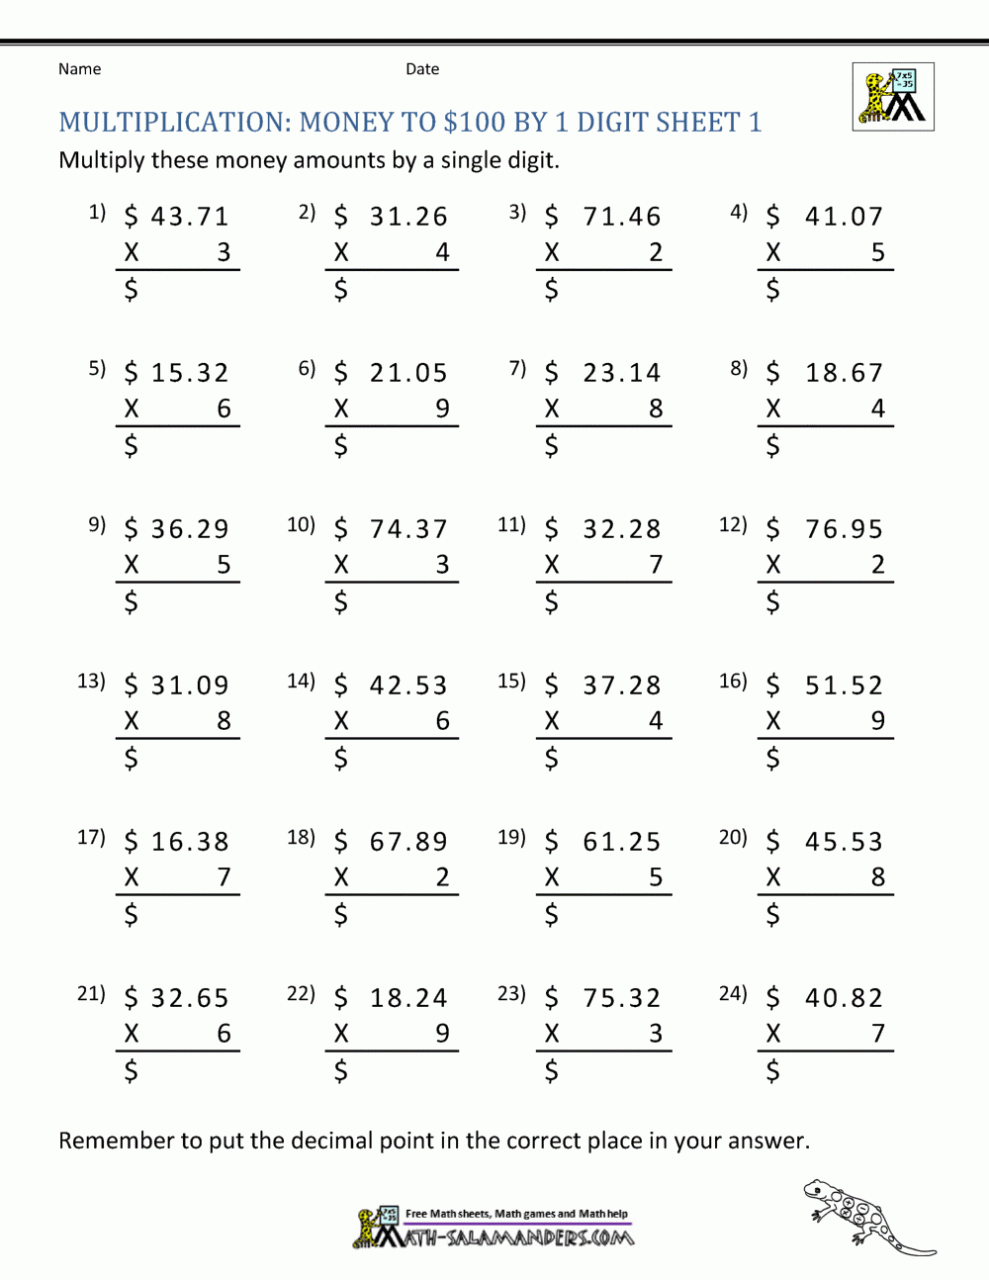 printable math sheets multiplication 4 digits money by 1 digit 1